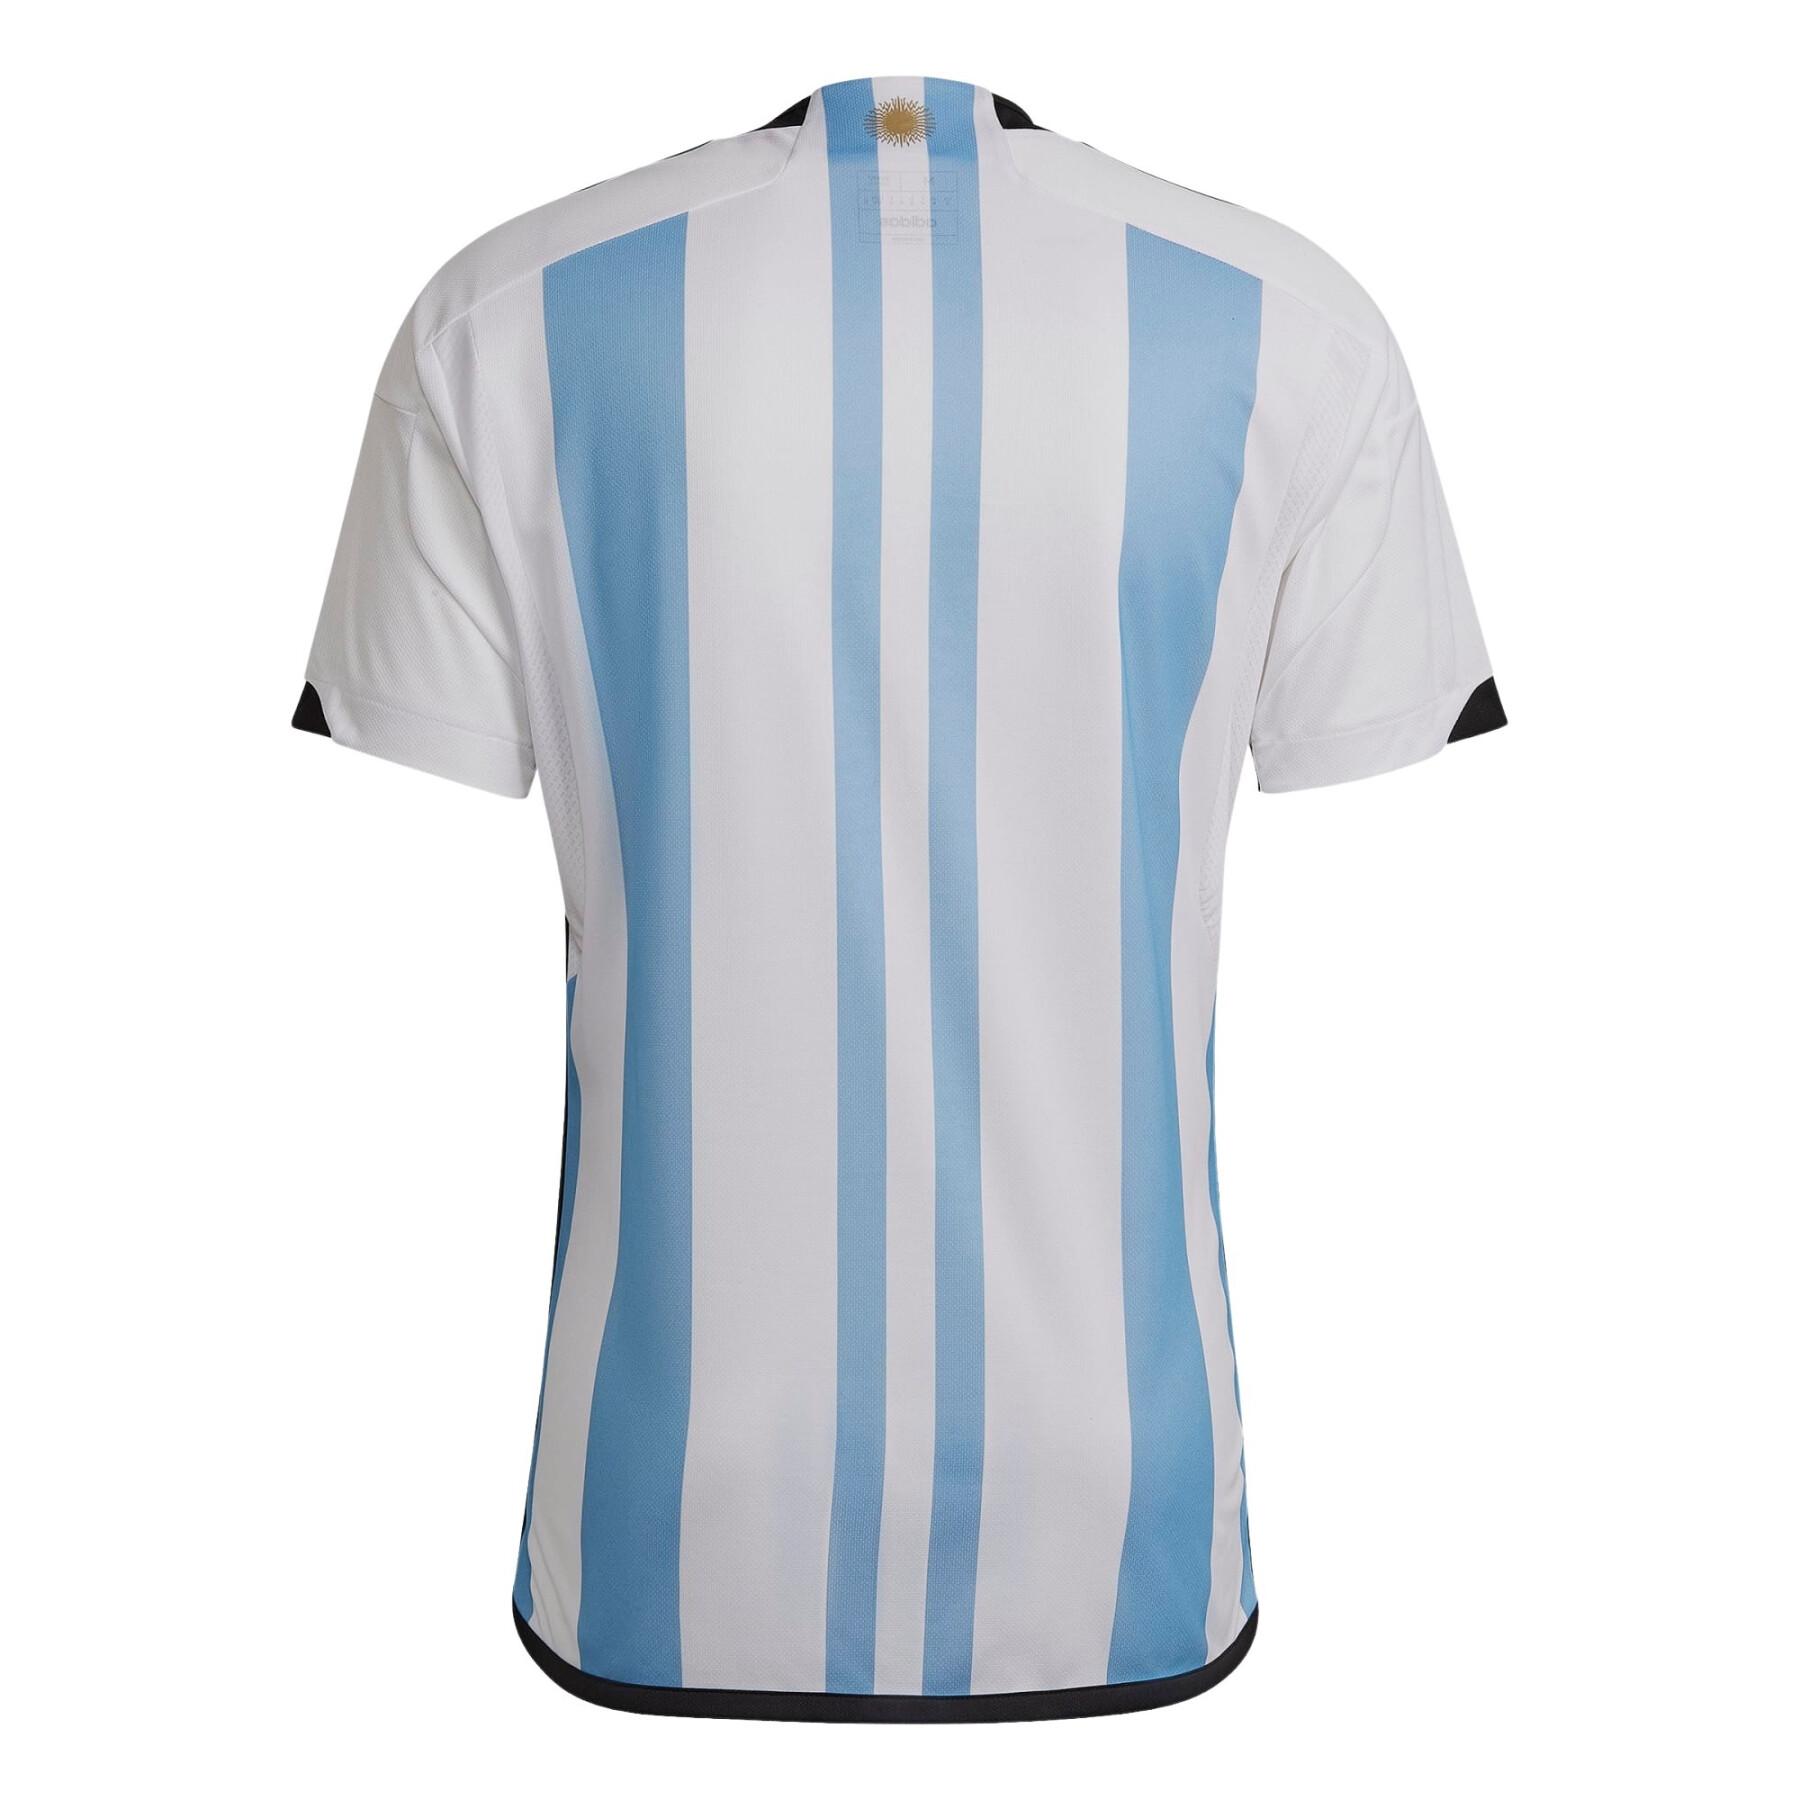 Home jersey World Cup 2022 Argentine